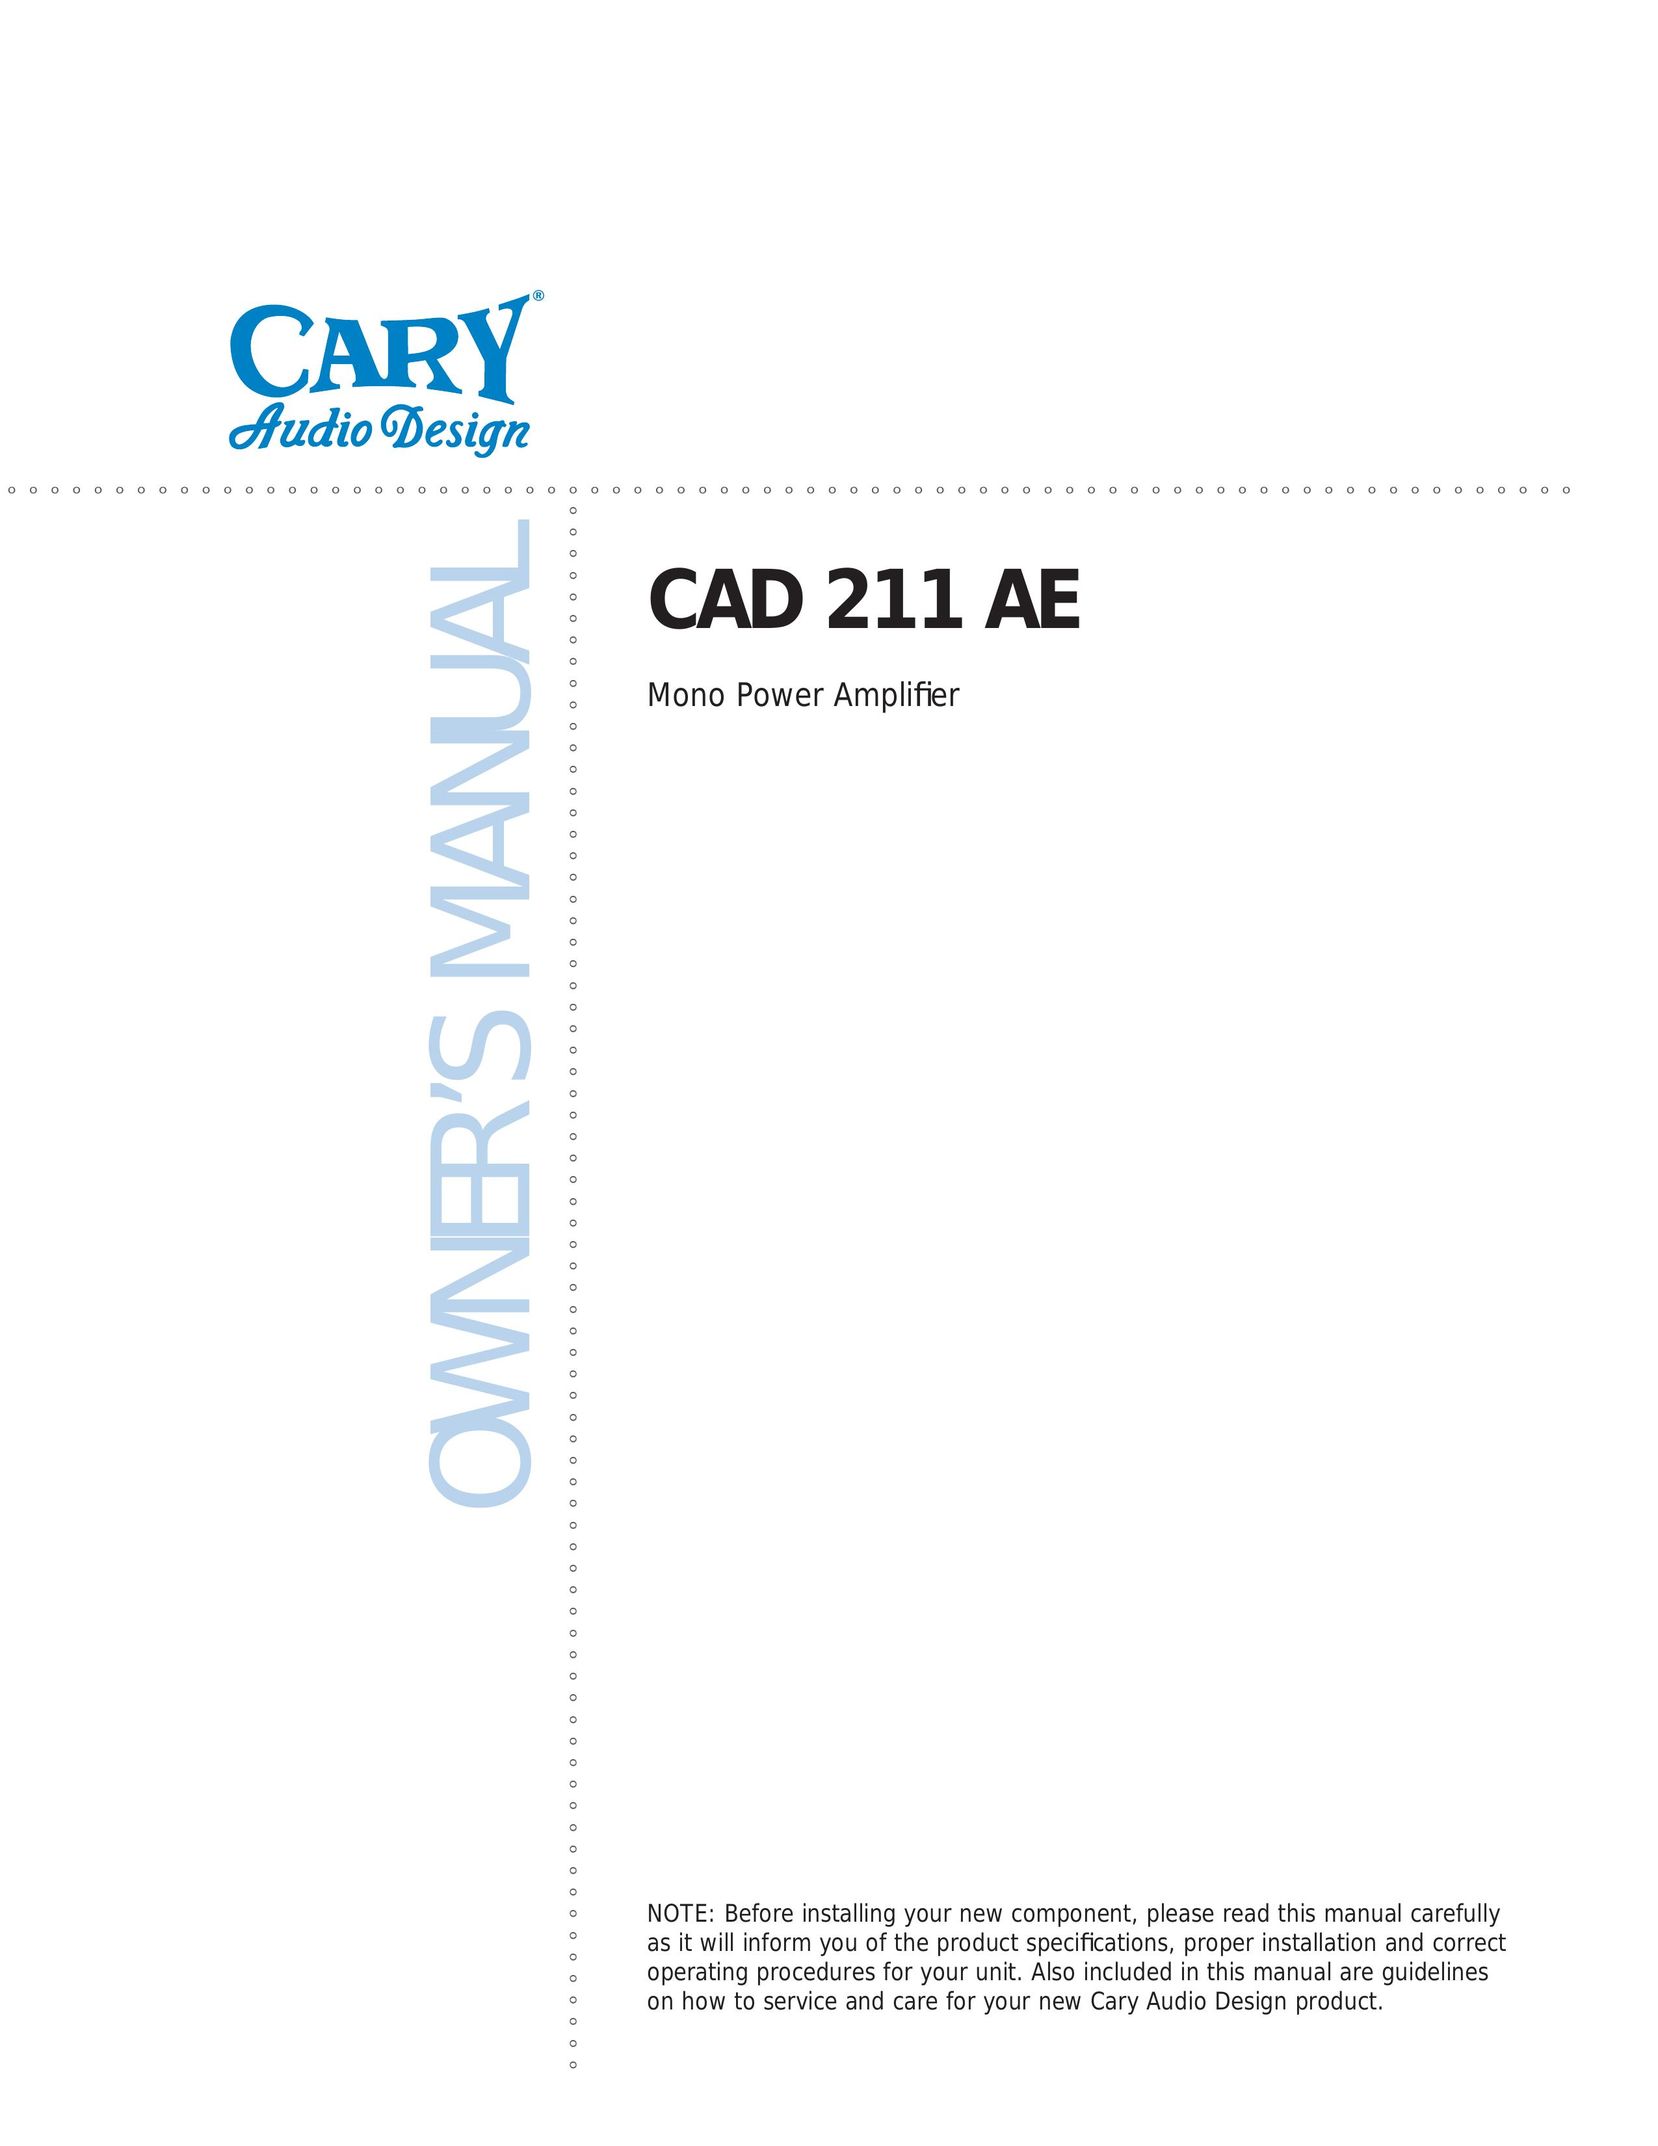 Cary Audio Design CAD 211 AE Stereo Amplifier User Manual